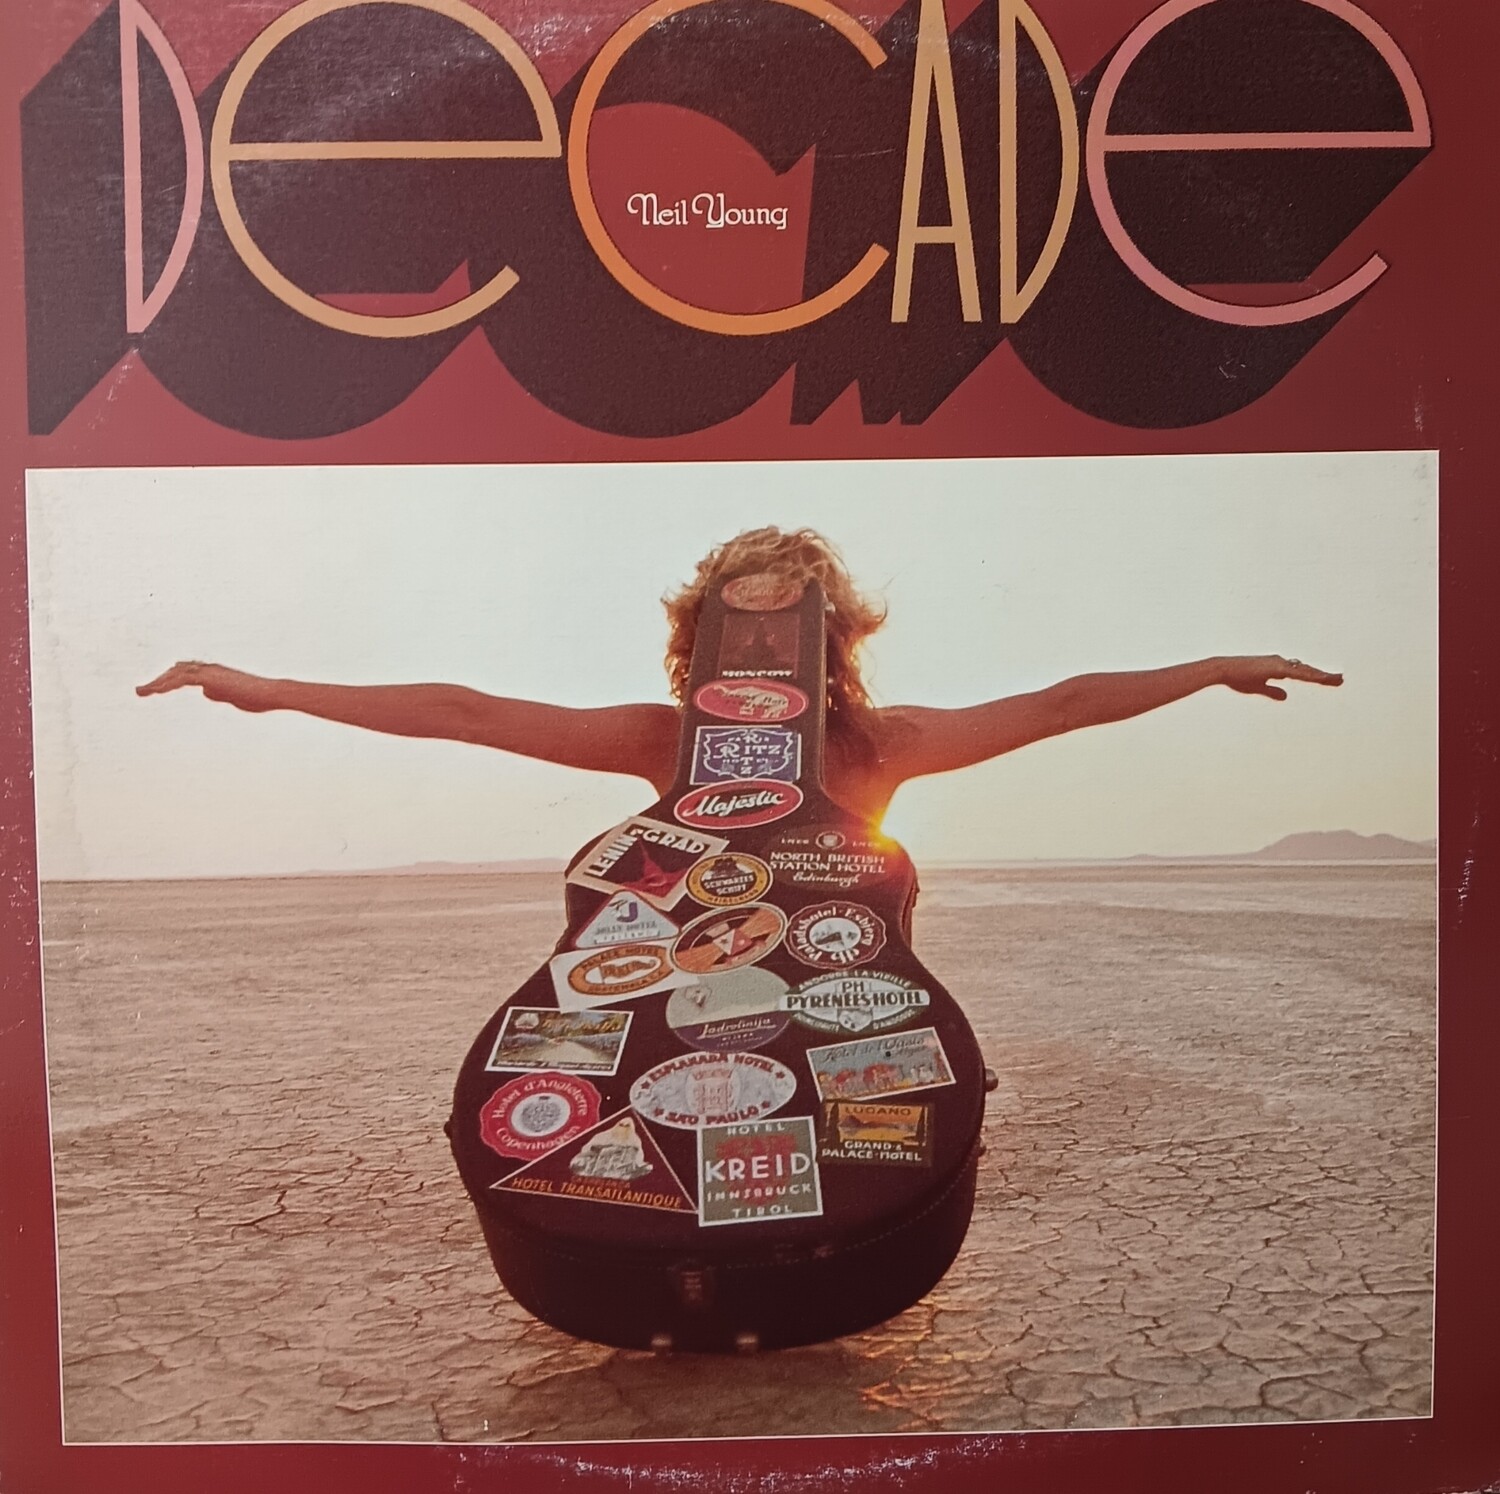 NEIL YOUNG - Decade